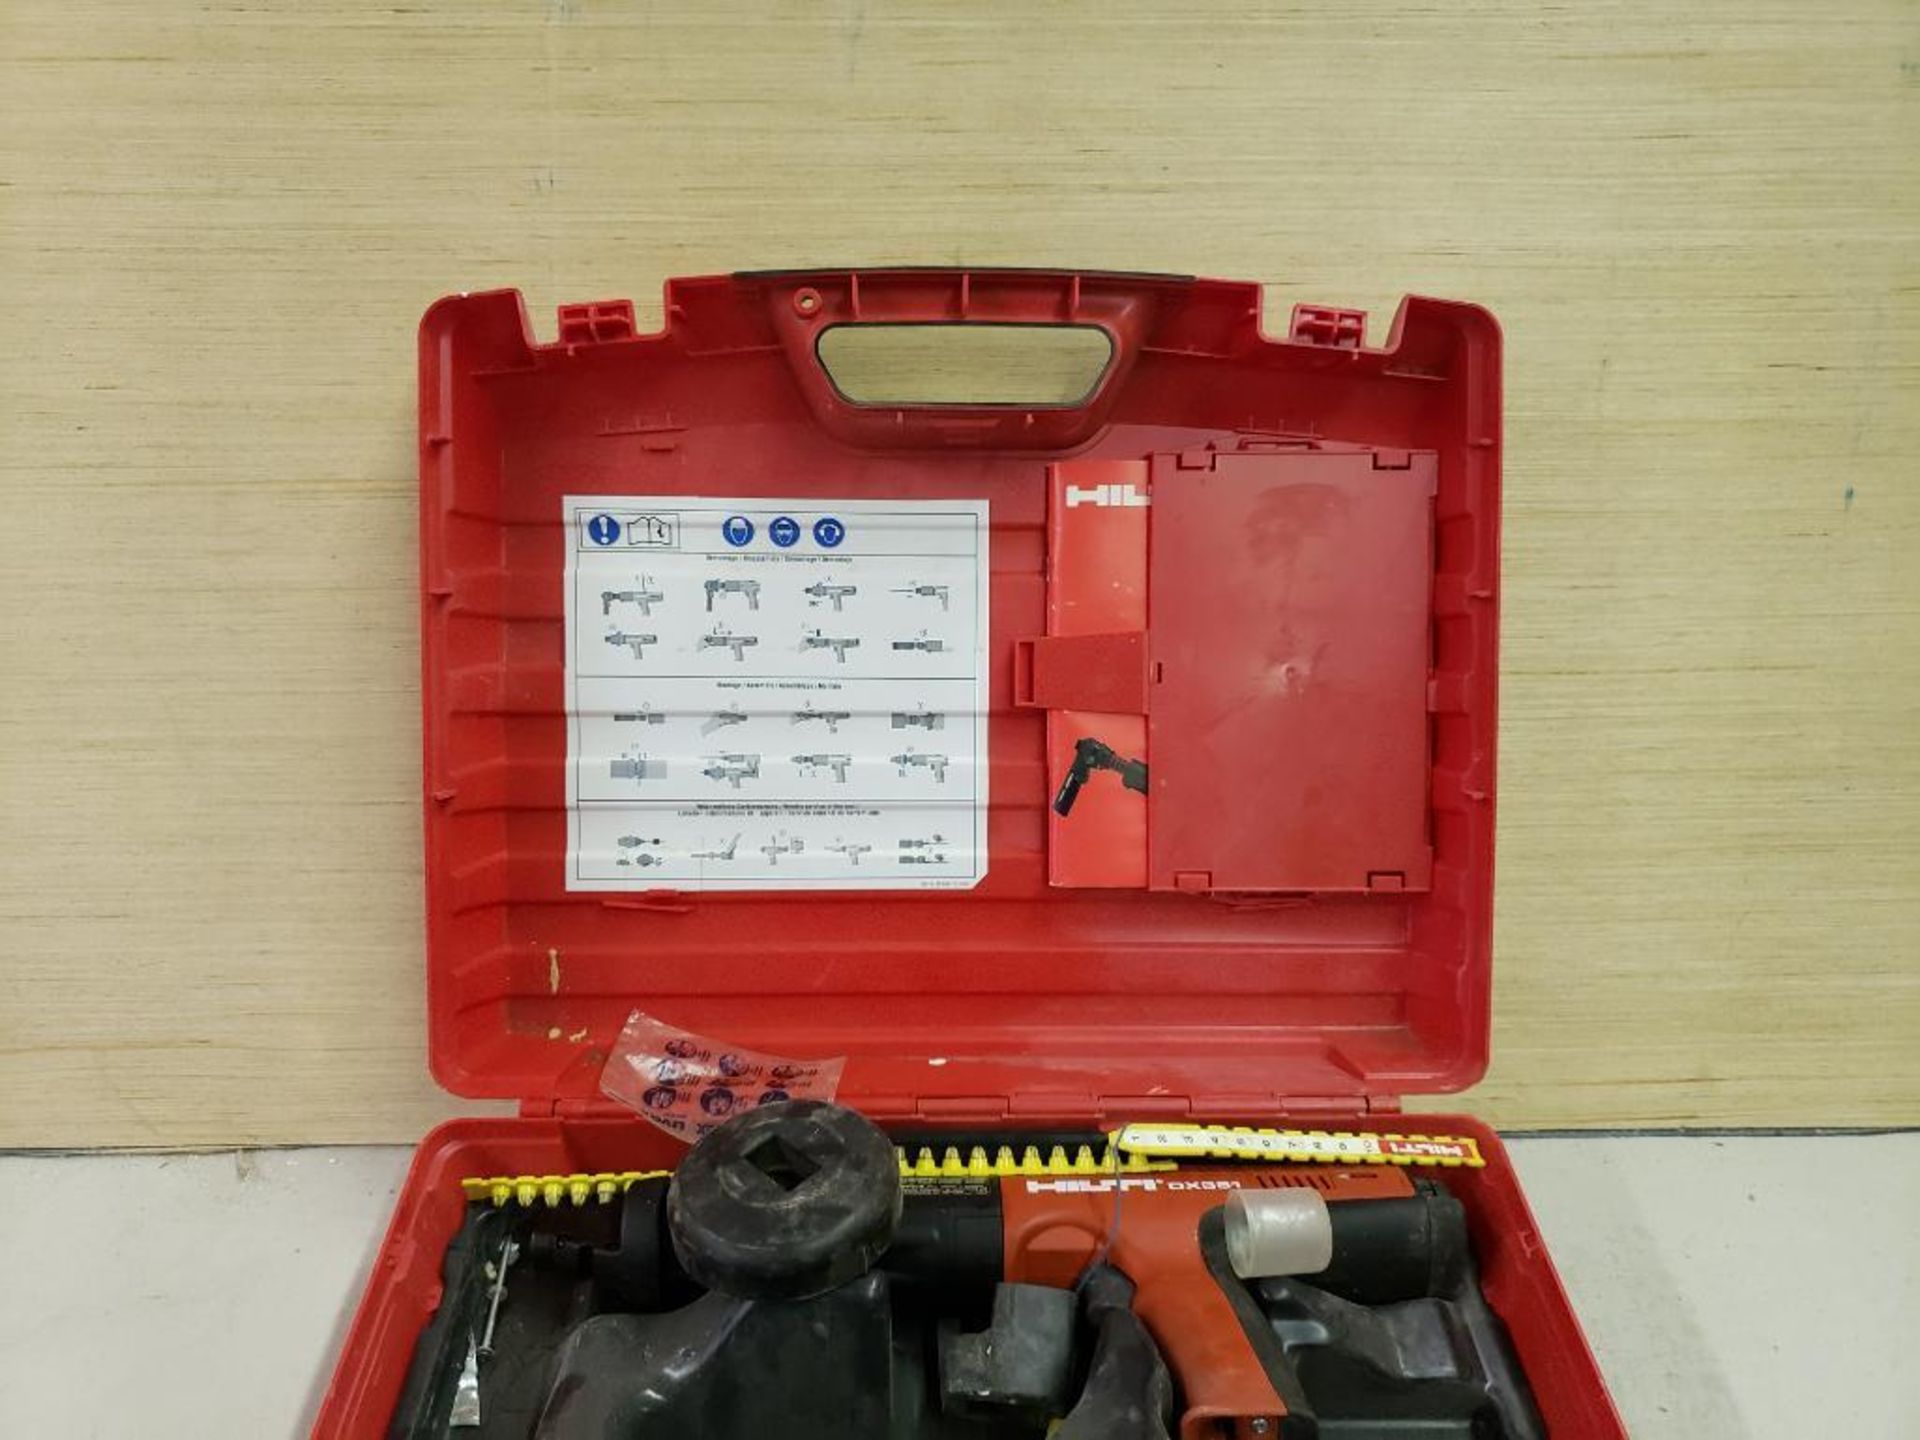 Hilti DX351 powder actuated tool. - Image 3 of 8